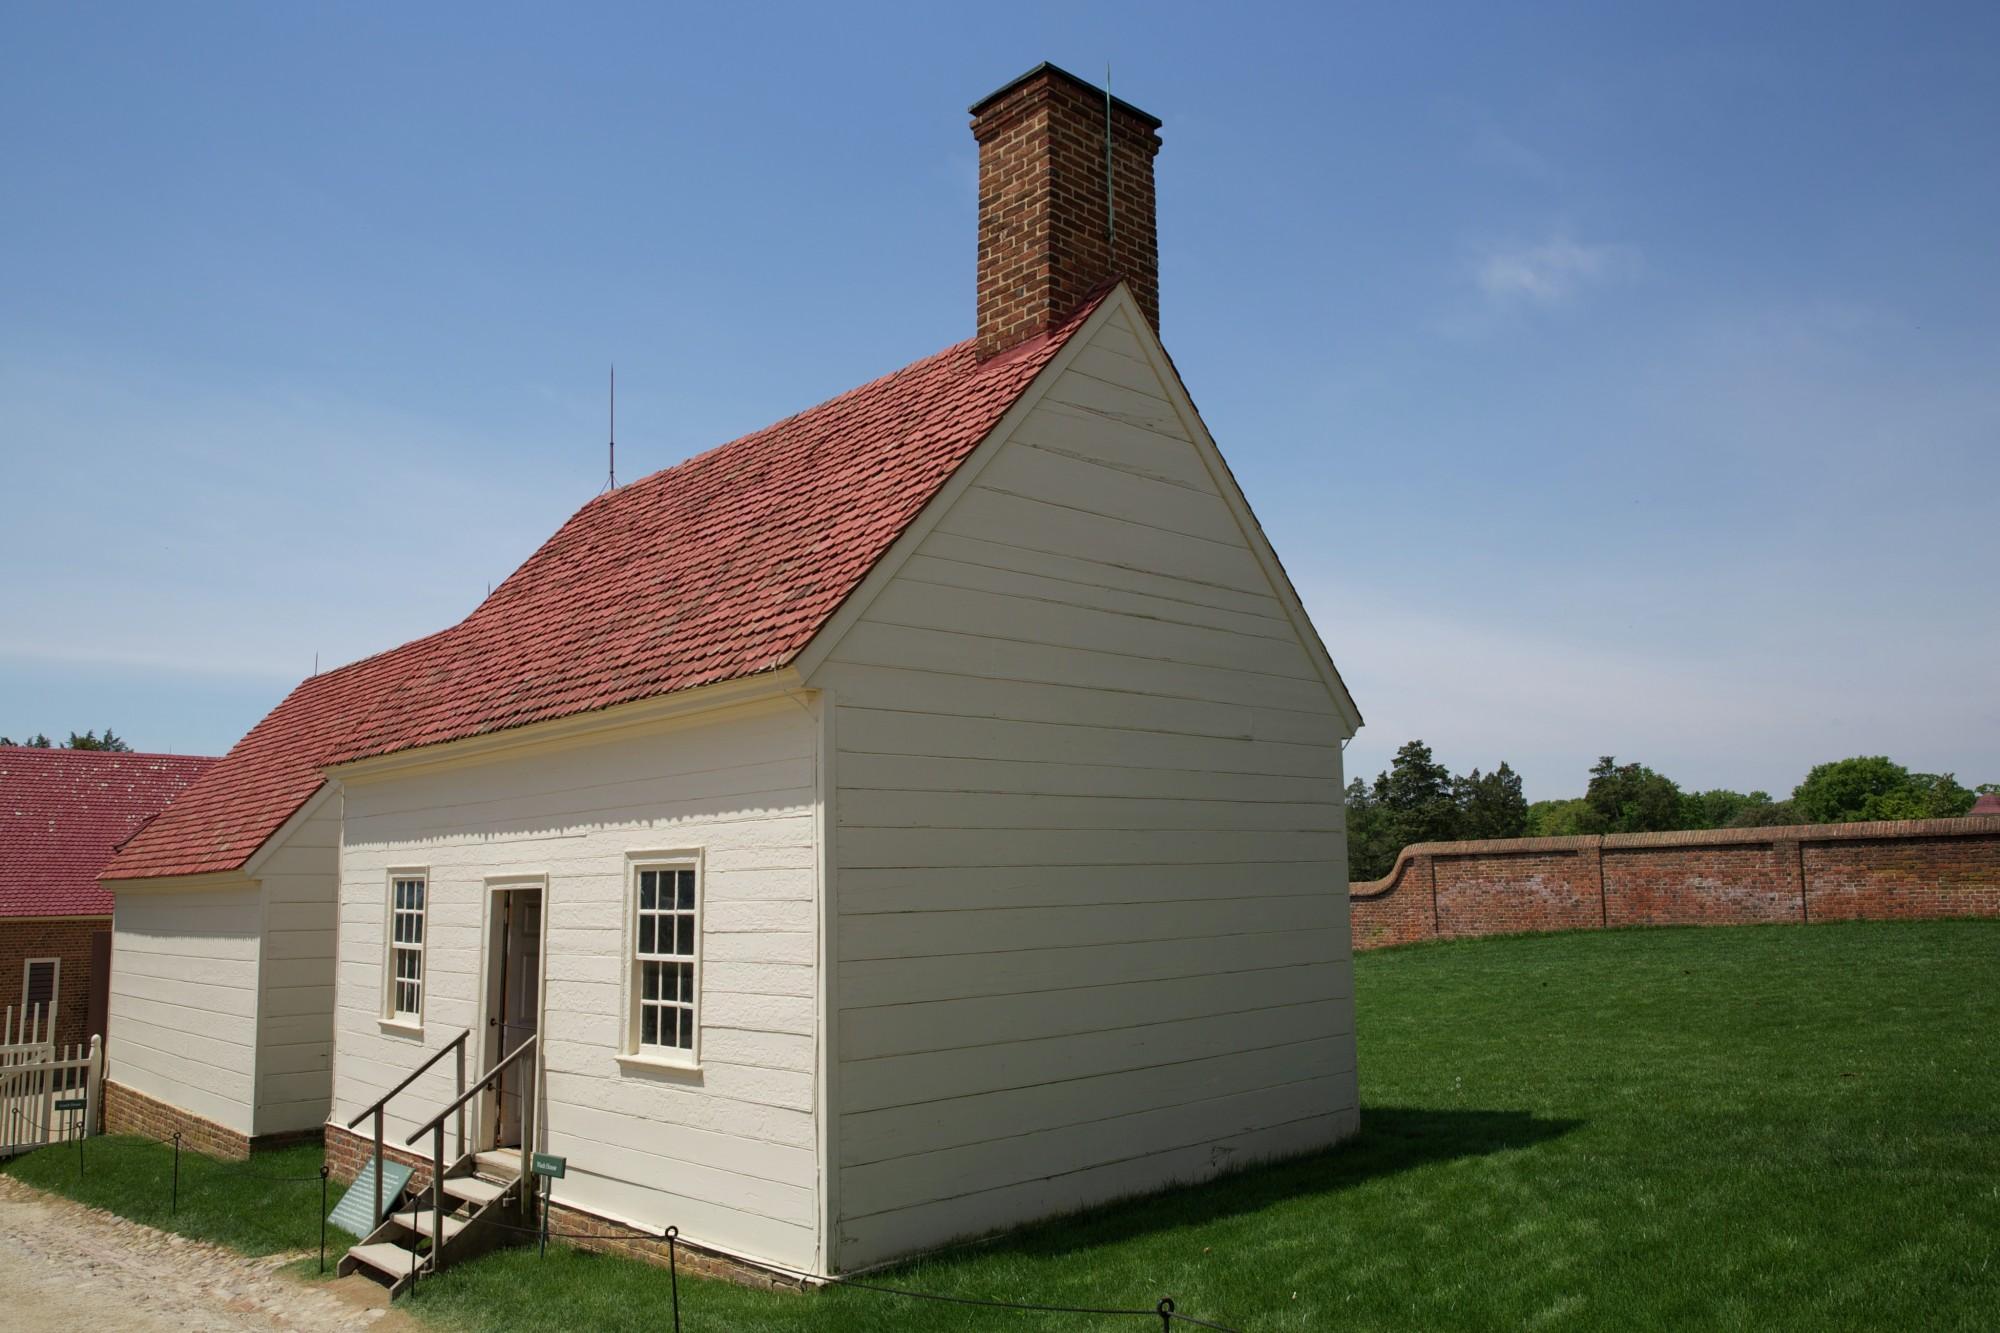 The Wash House is an Original Structure. (MVLA)